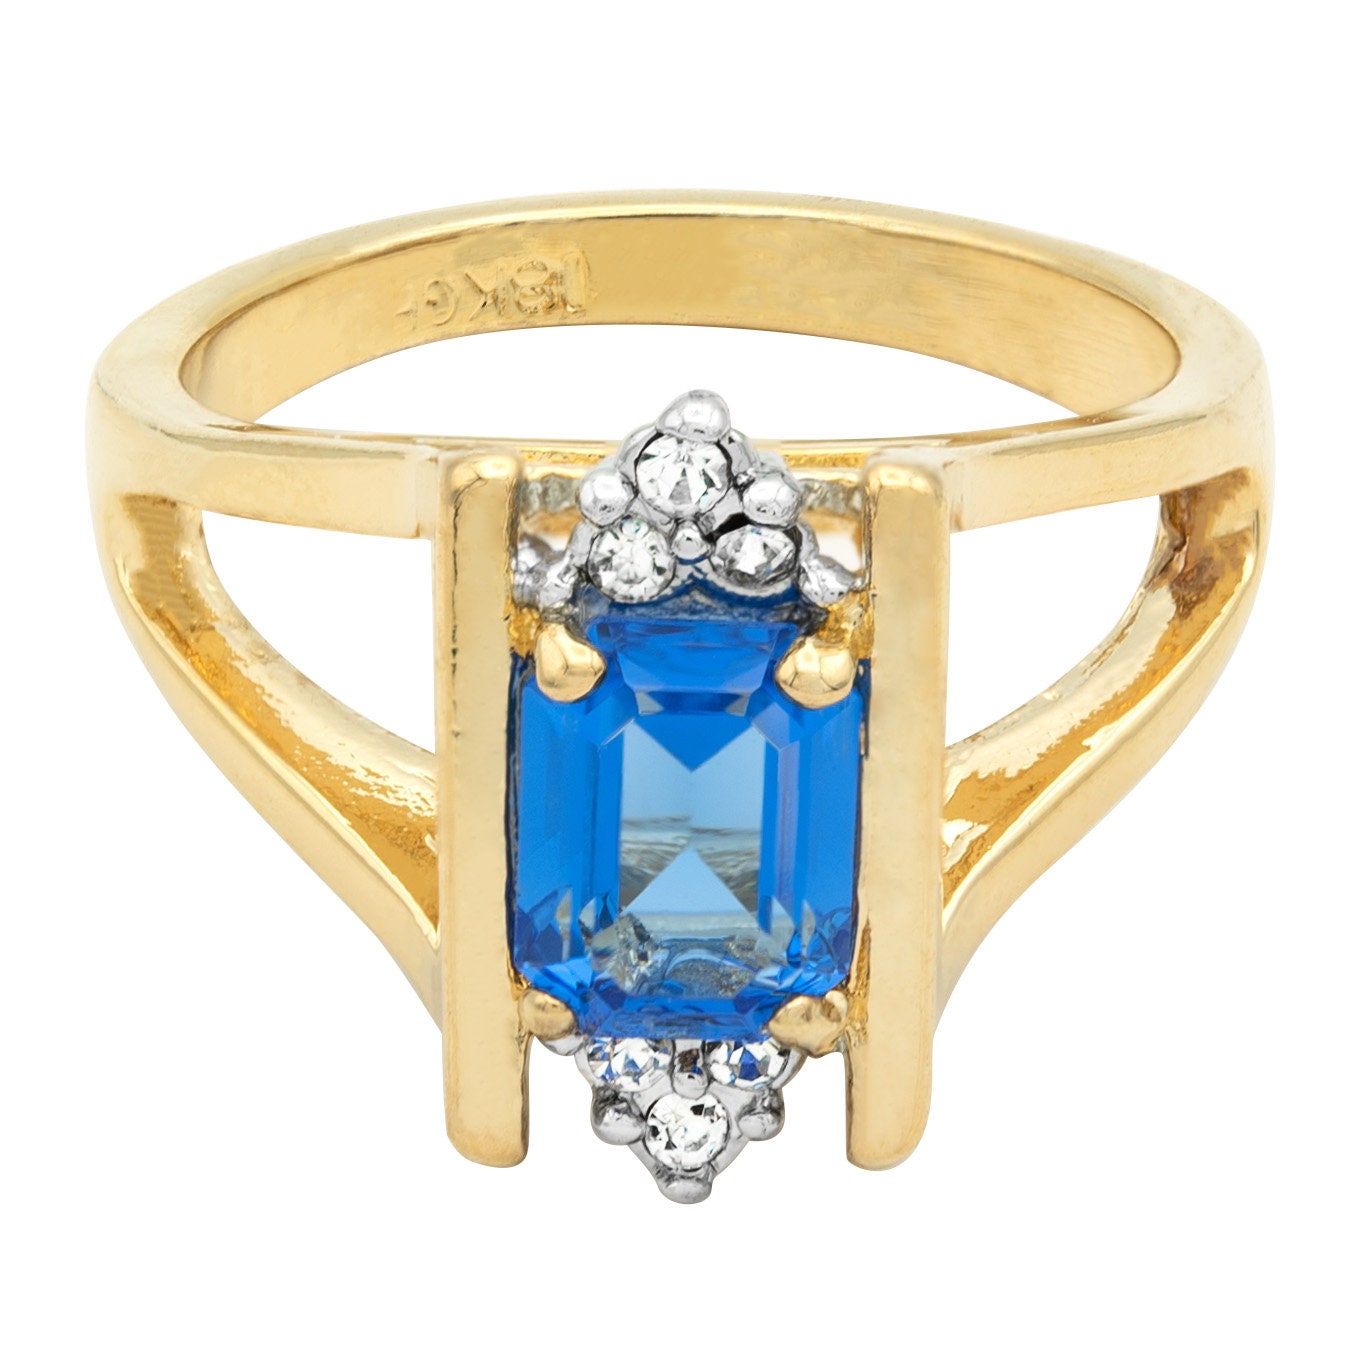 Vintage Sapphire Ring Antique 18k Gold and Clear Swarovski Crystals September Birthstone #R1747 - Limited Stock - Never Worn